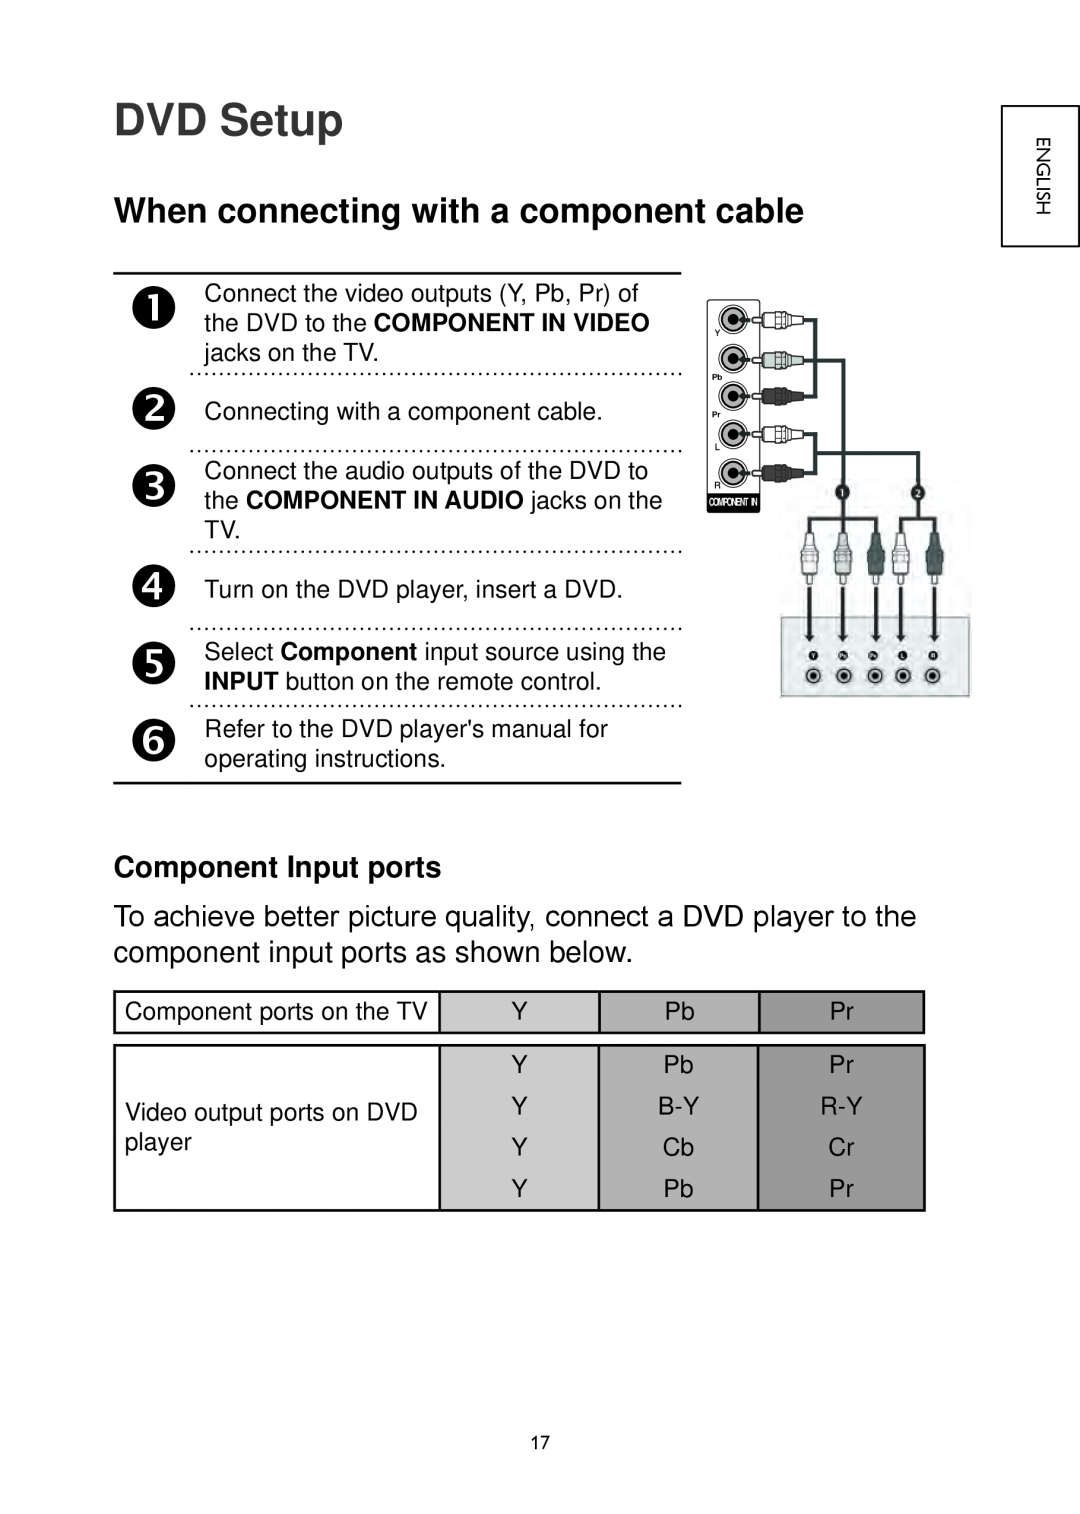 Hitachi 22LD4550U, 32LD4550U, 32LD4550C, 26LD4550C DVD Setup, When connecting with a component cable, Component Input ports 